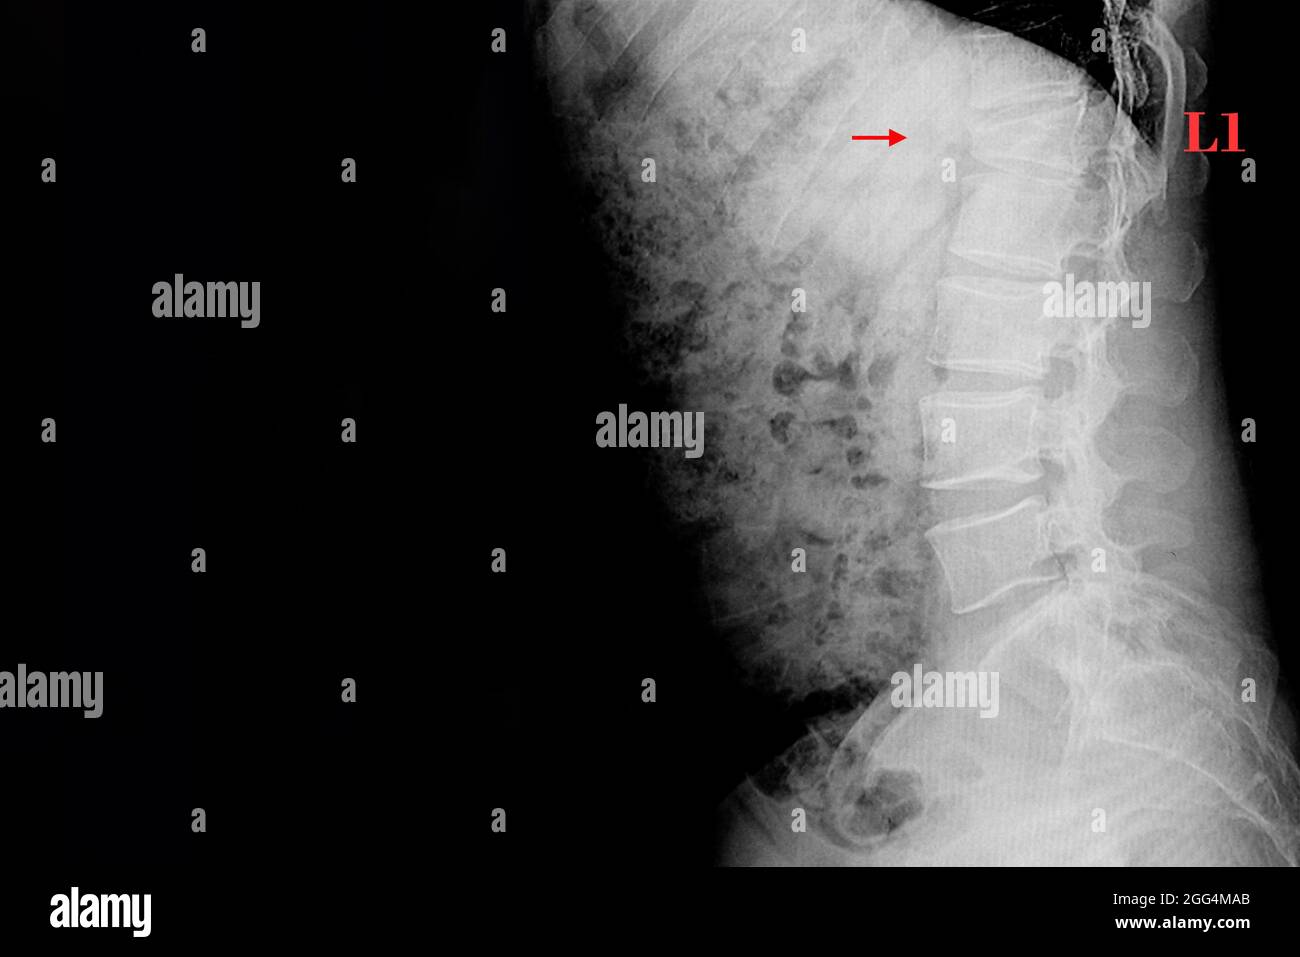 Xray image of lumbar spines of a patient showing compression fracture of L1 lumbar spine. Stock Photo